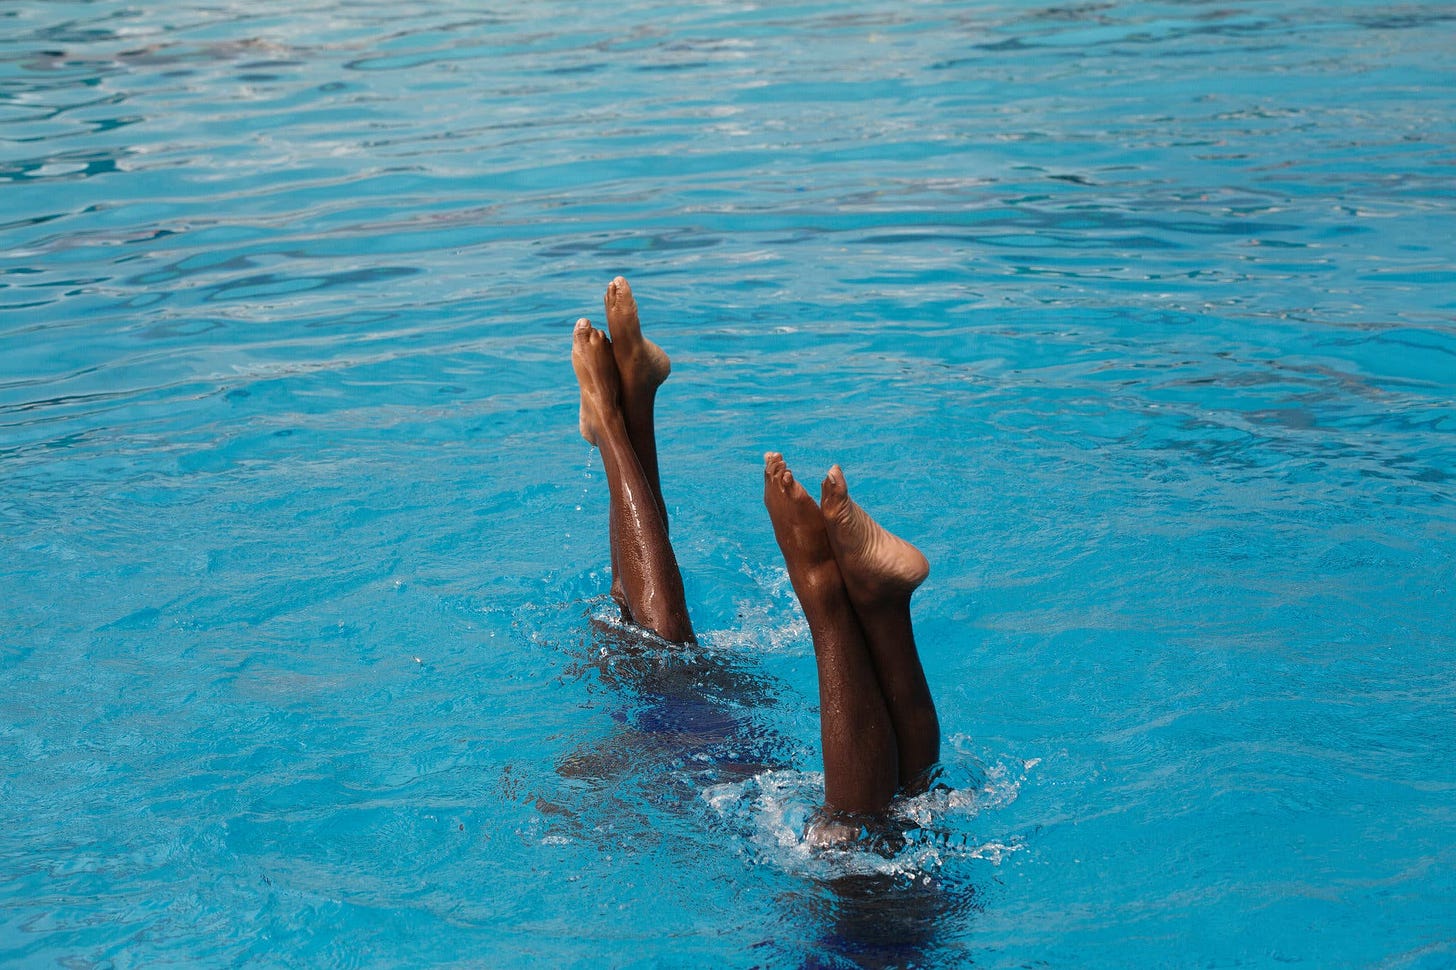 An image of two pairs of brown pointed feet emerging from blue water.